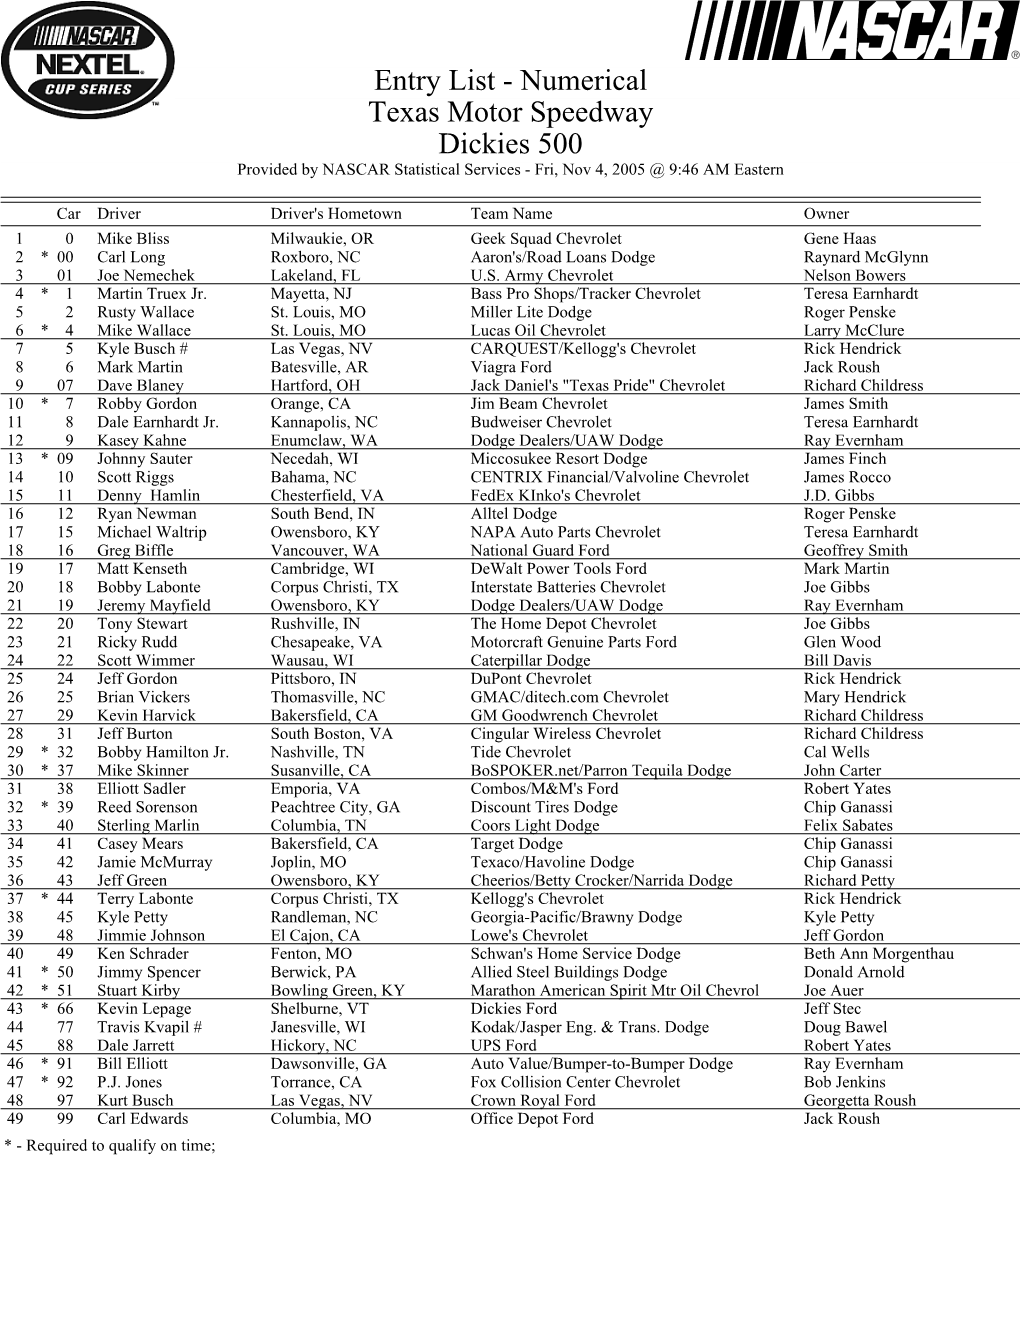 Entry List - Numerical Texas Motor Speedway Dickies 500 Provided by NASCAR Statistical Services - Fri, Nov 4, 2005 @ 9:46 AM Eastern